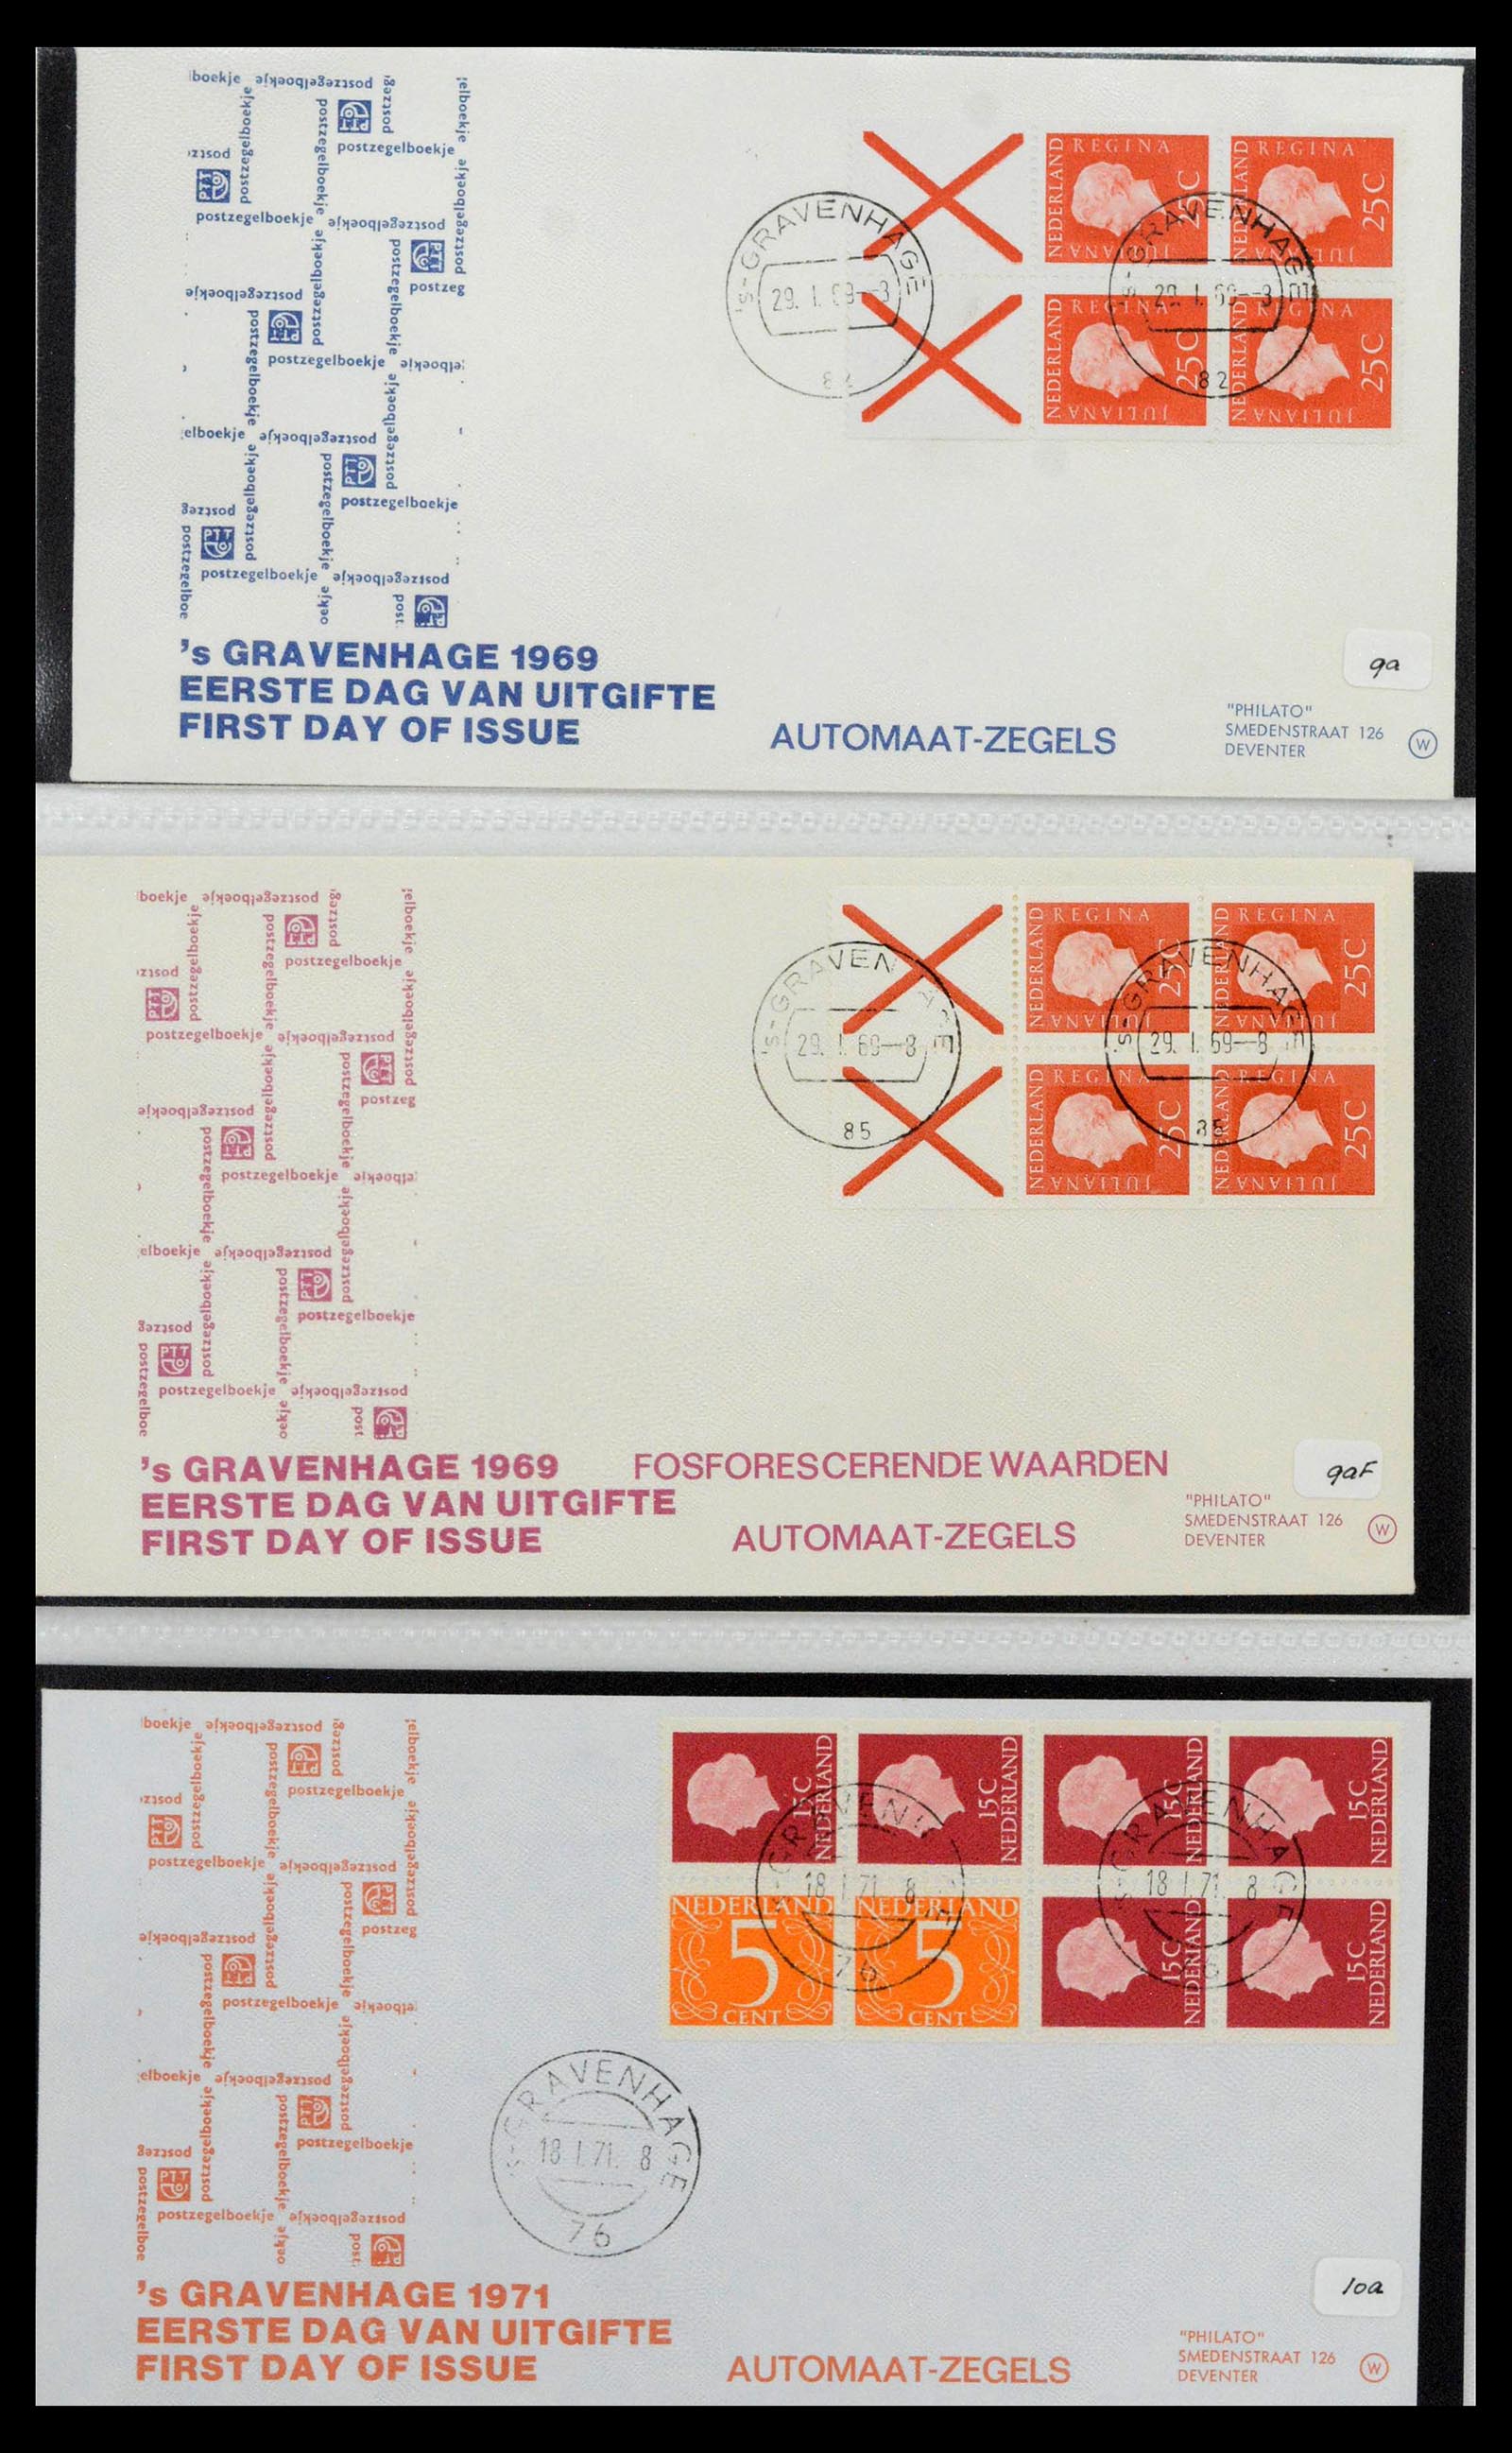 38559 0066 - Stamp collection 38559 Netherlands special first day covers.